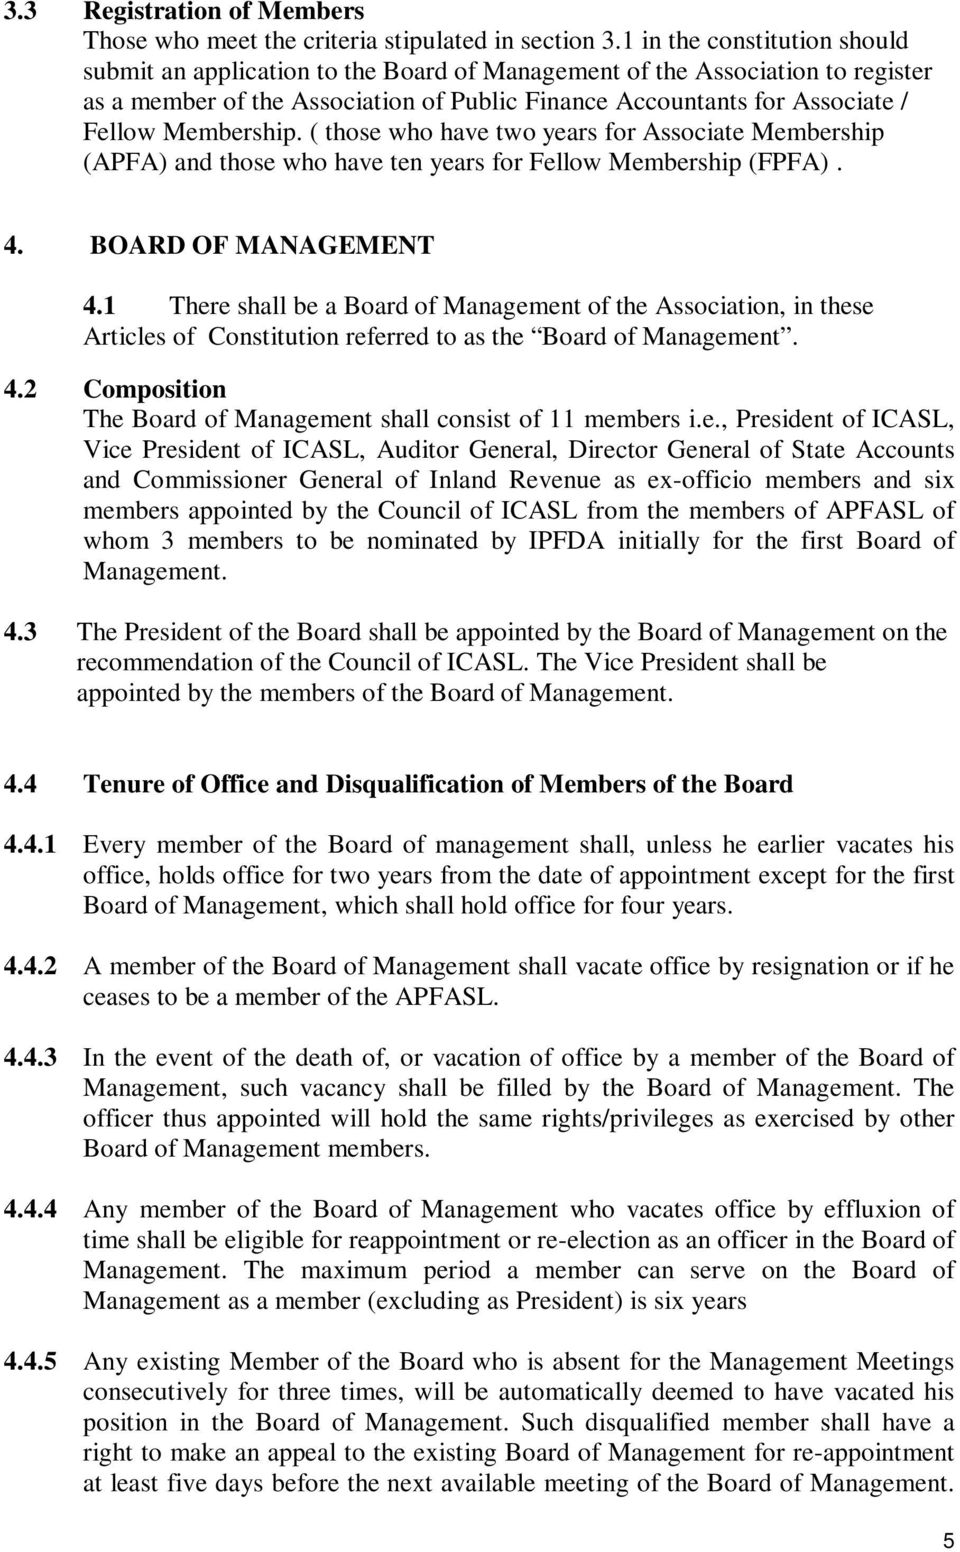 Membership. ( those who have two years for Associate Membership (APFA) and those who have ten years for Fellow Membership (FPFA). 4. BOARD OF MANAGEMENT 4.